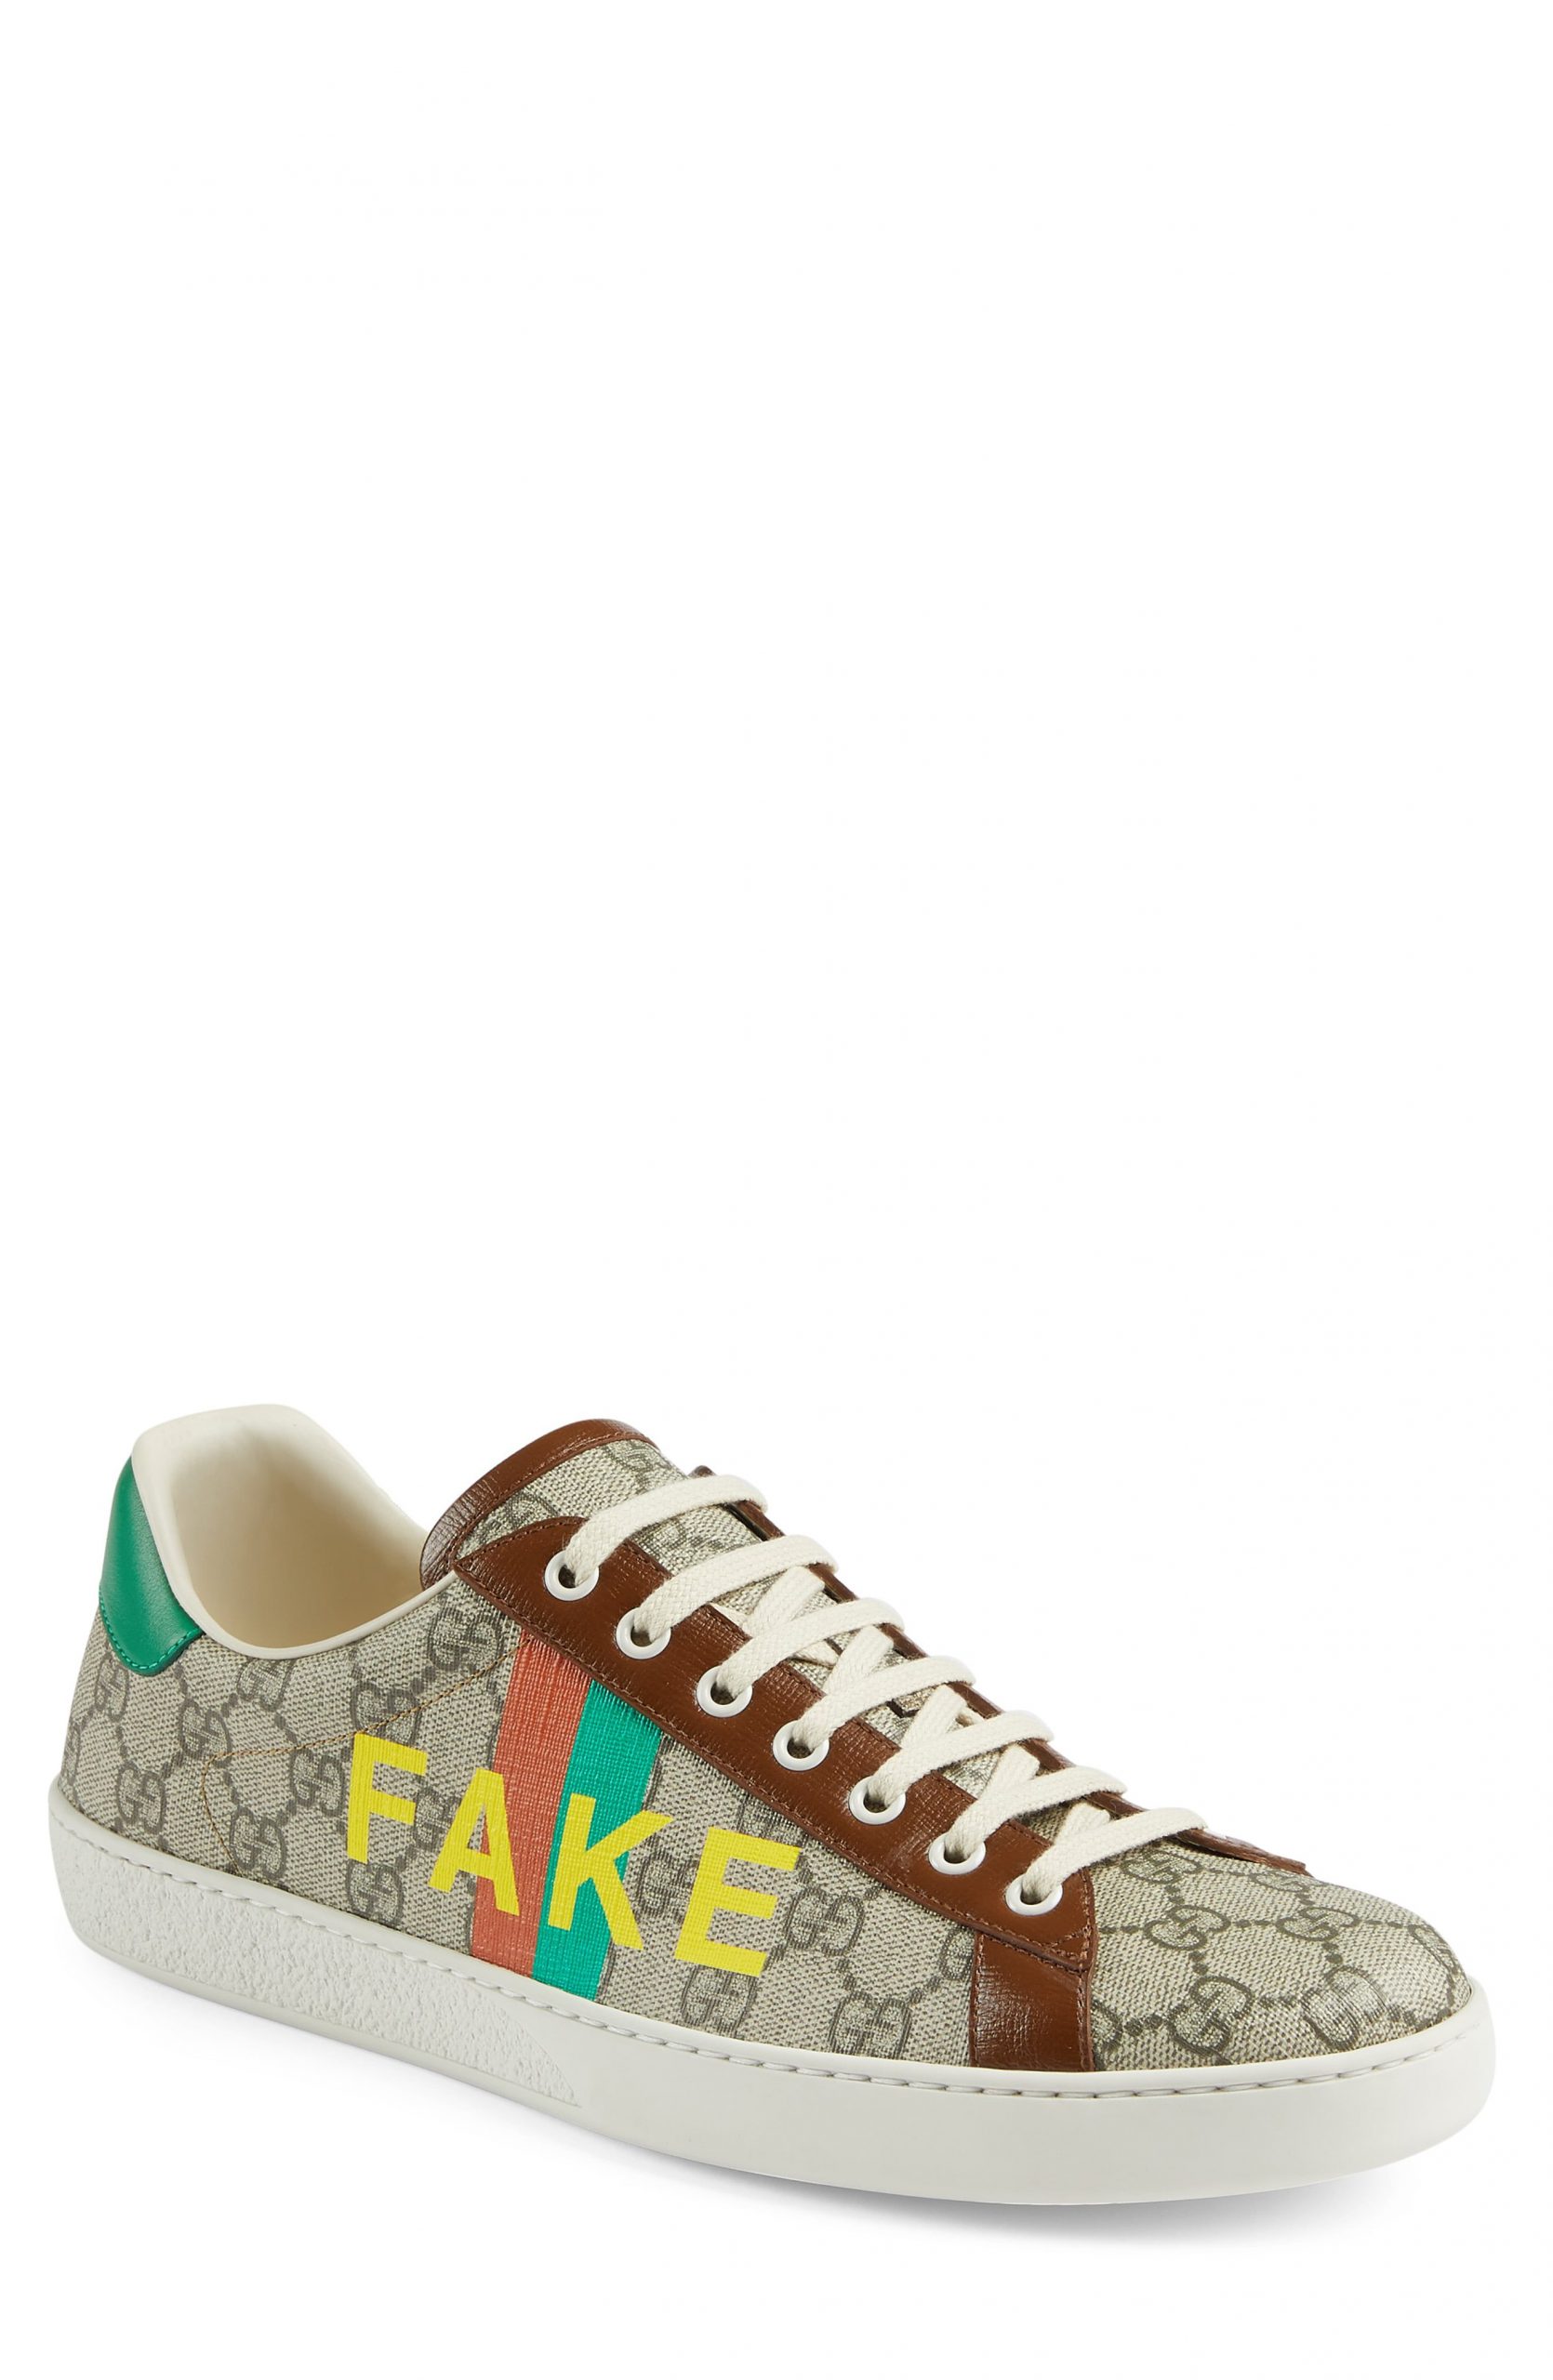 gucci gg supreme low top sneakers